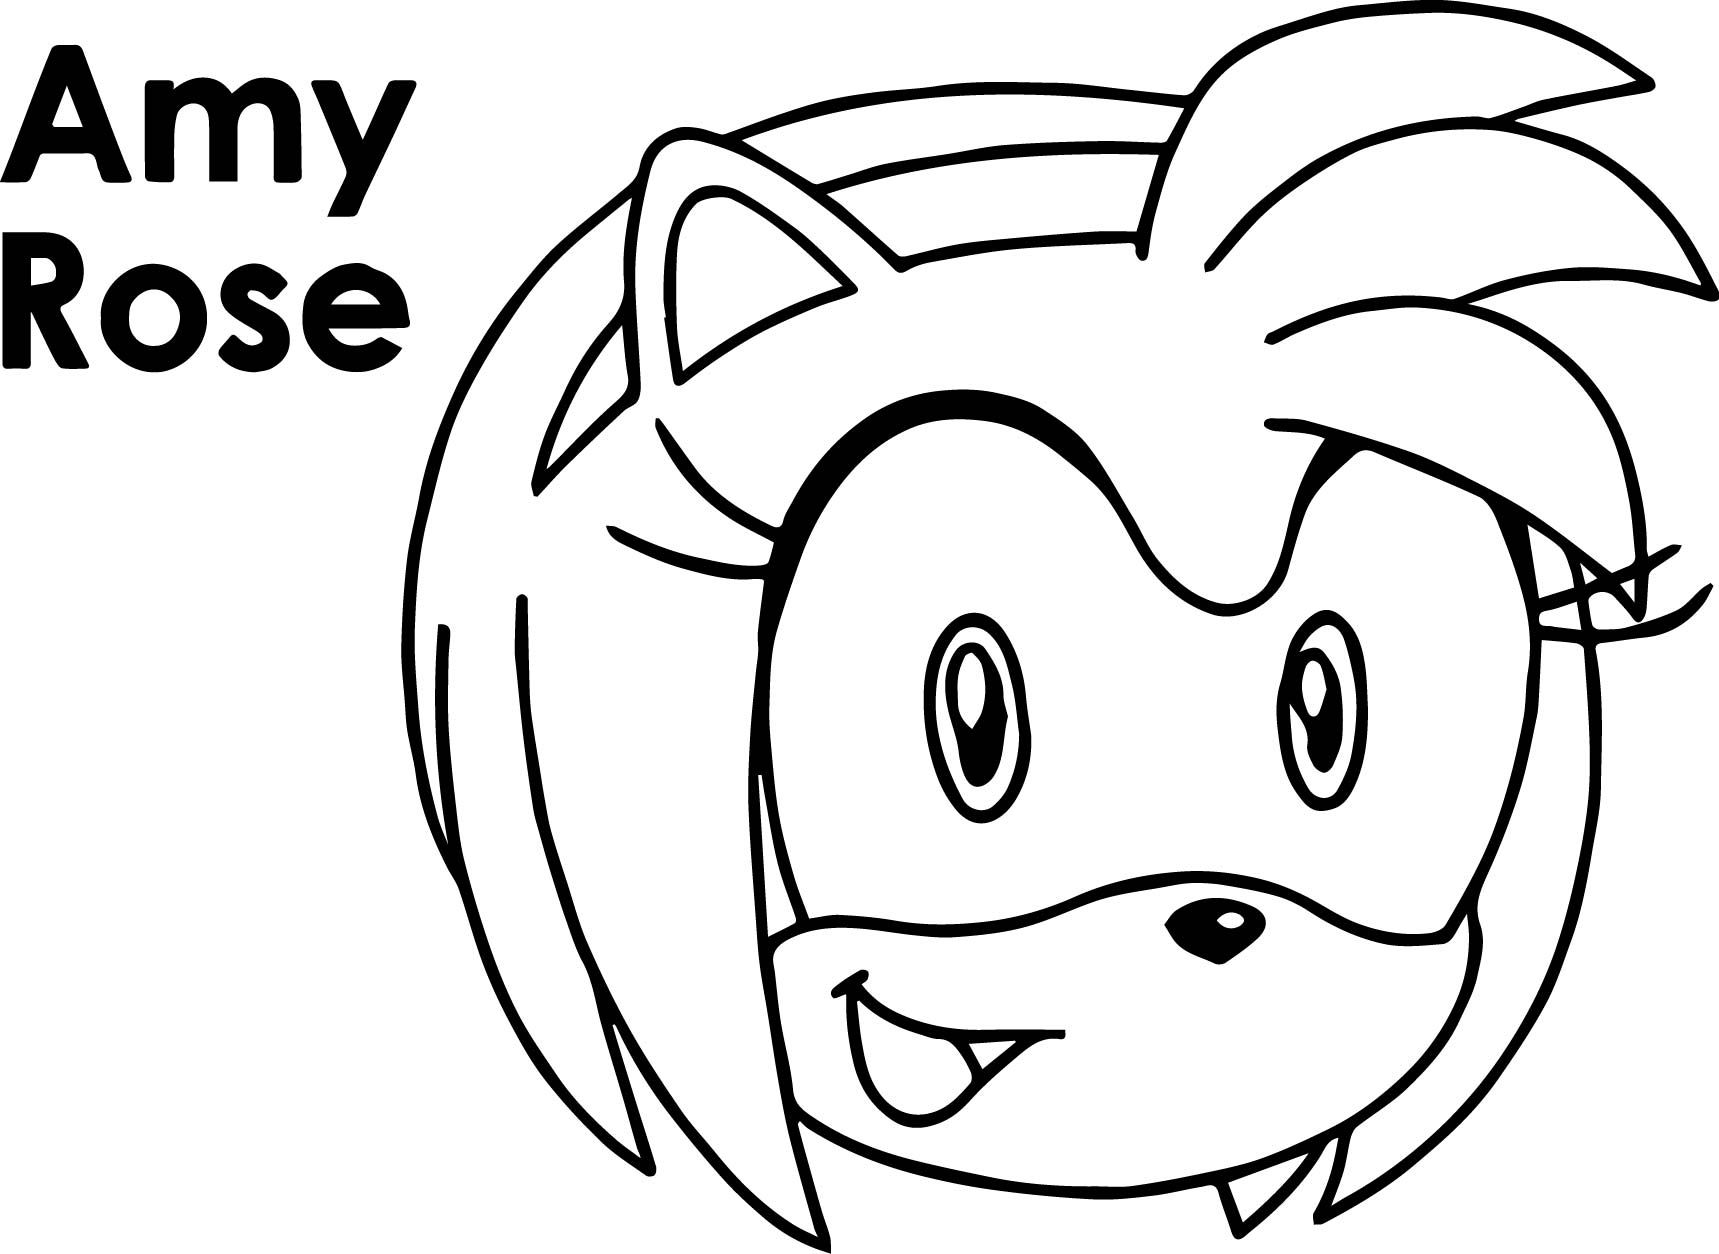 Amy Rose Printable Coloring Page